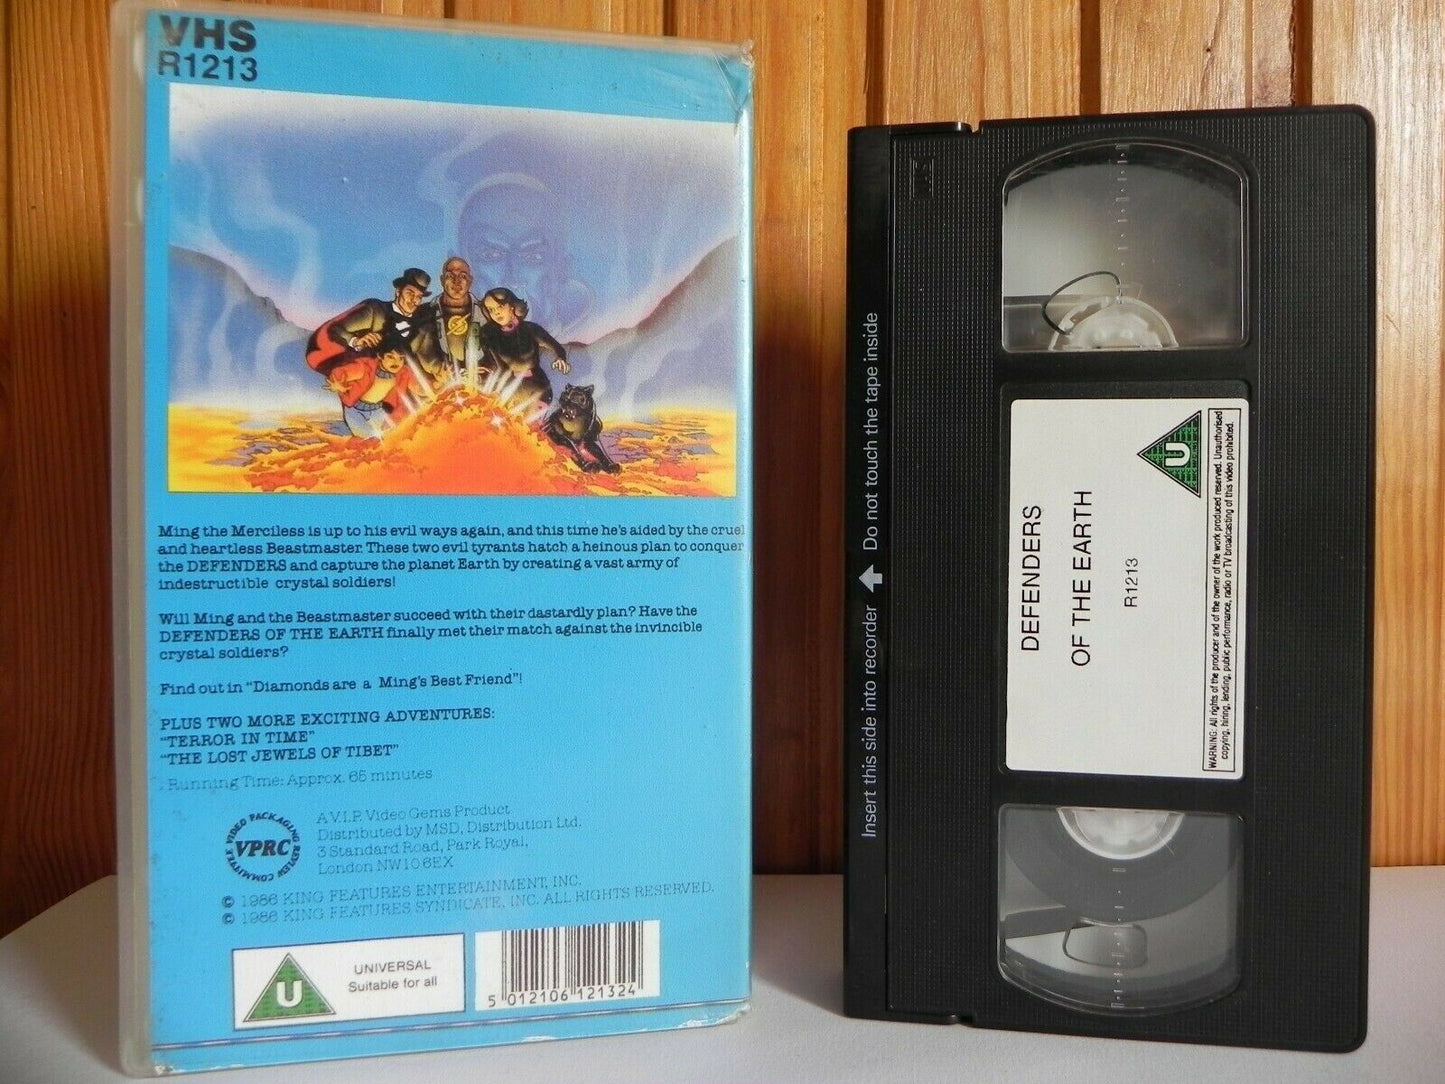 Defenders Of The Earth - Video Gems - Diamonds Are A Ming's Best Friend - VHS-